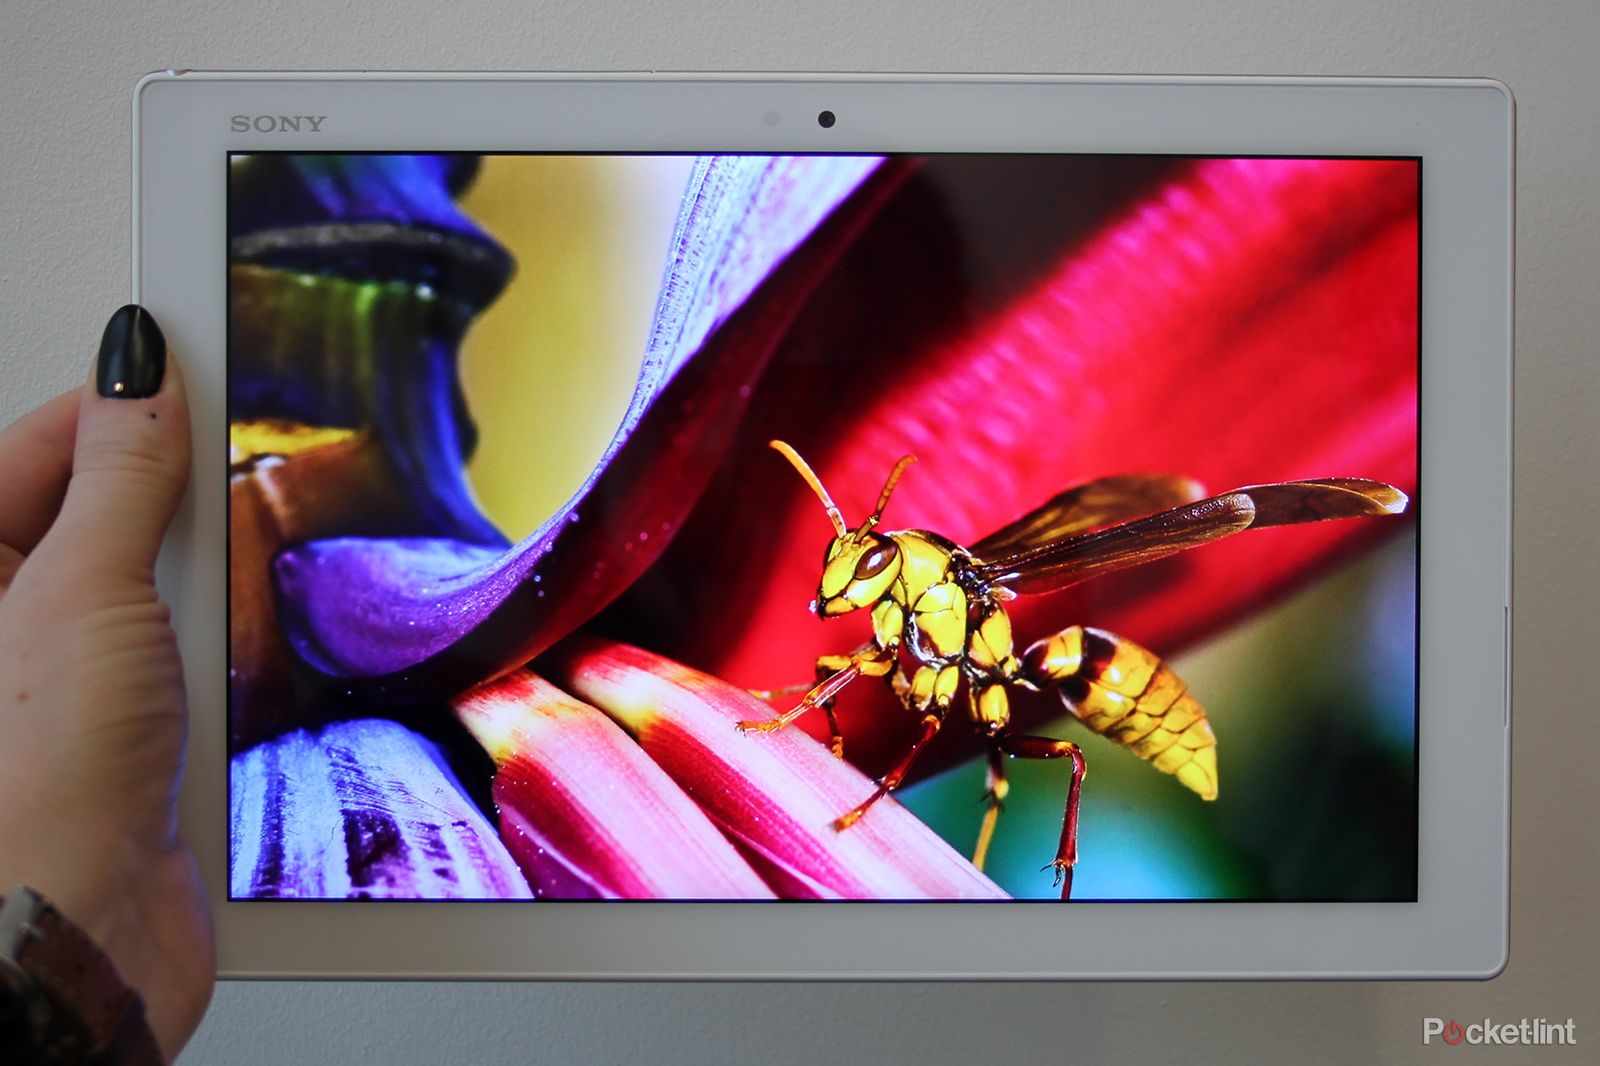 sony xperia z4 tablet hands on slimmer lighter and sexier image 30